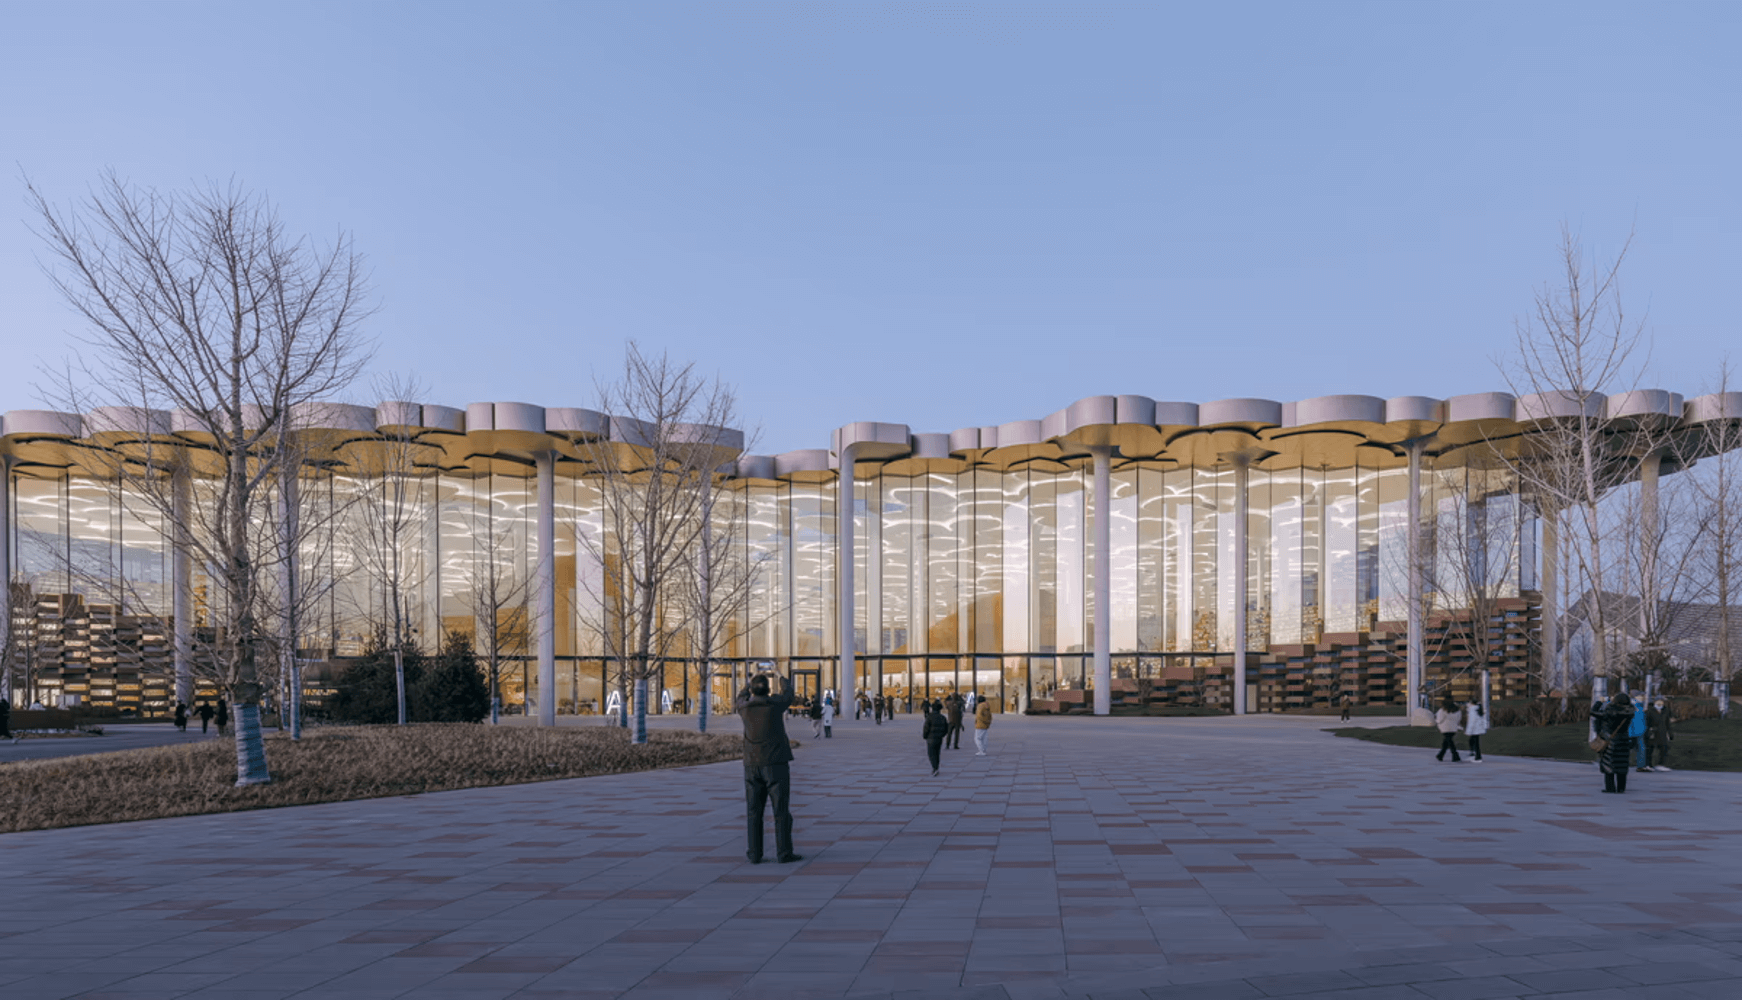 Snøhetta’s new Beijing City Library is the world’s largest climatized reading space